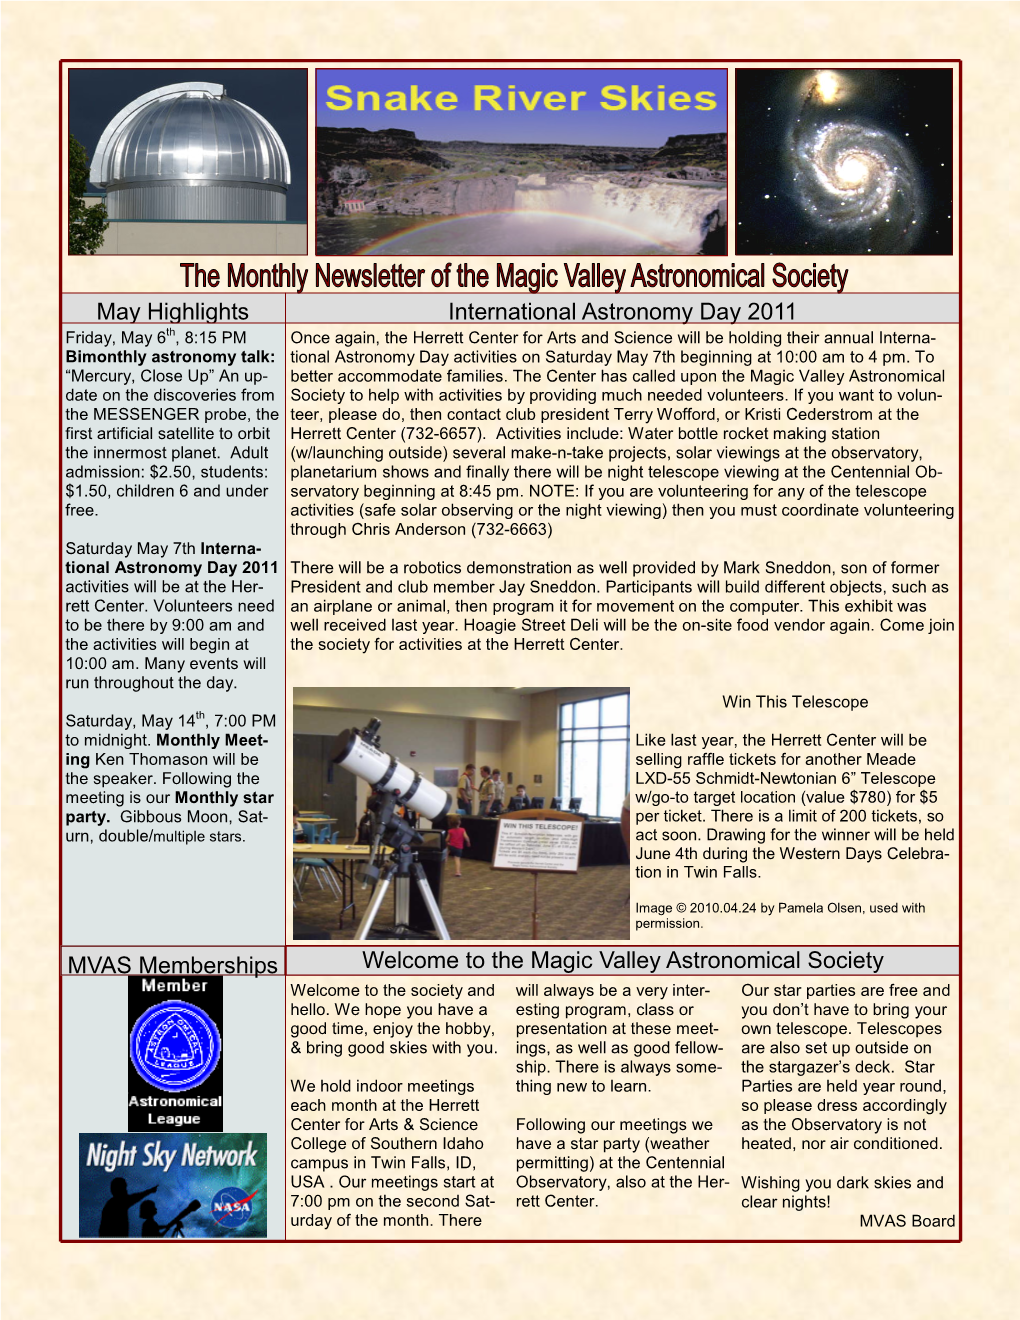 Welcome to the Magic Valley Astronomical Society International